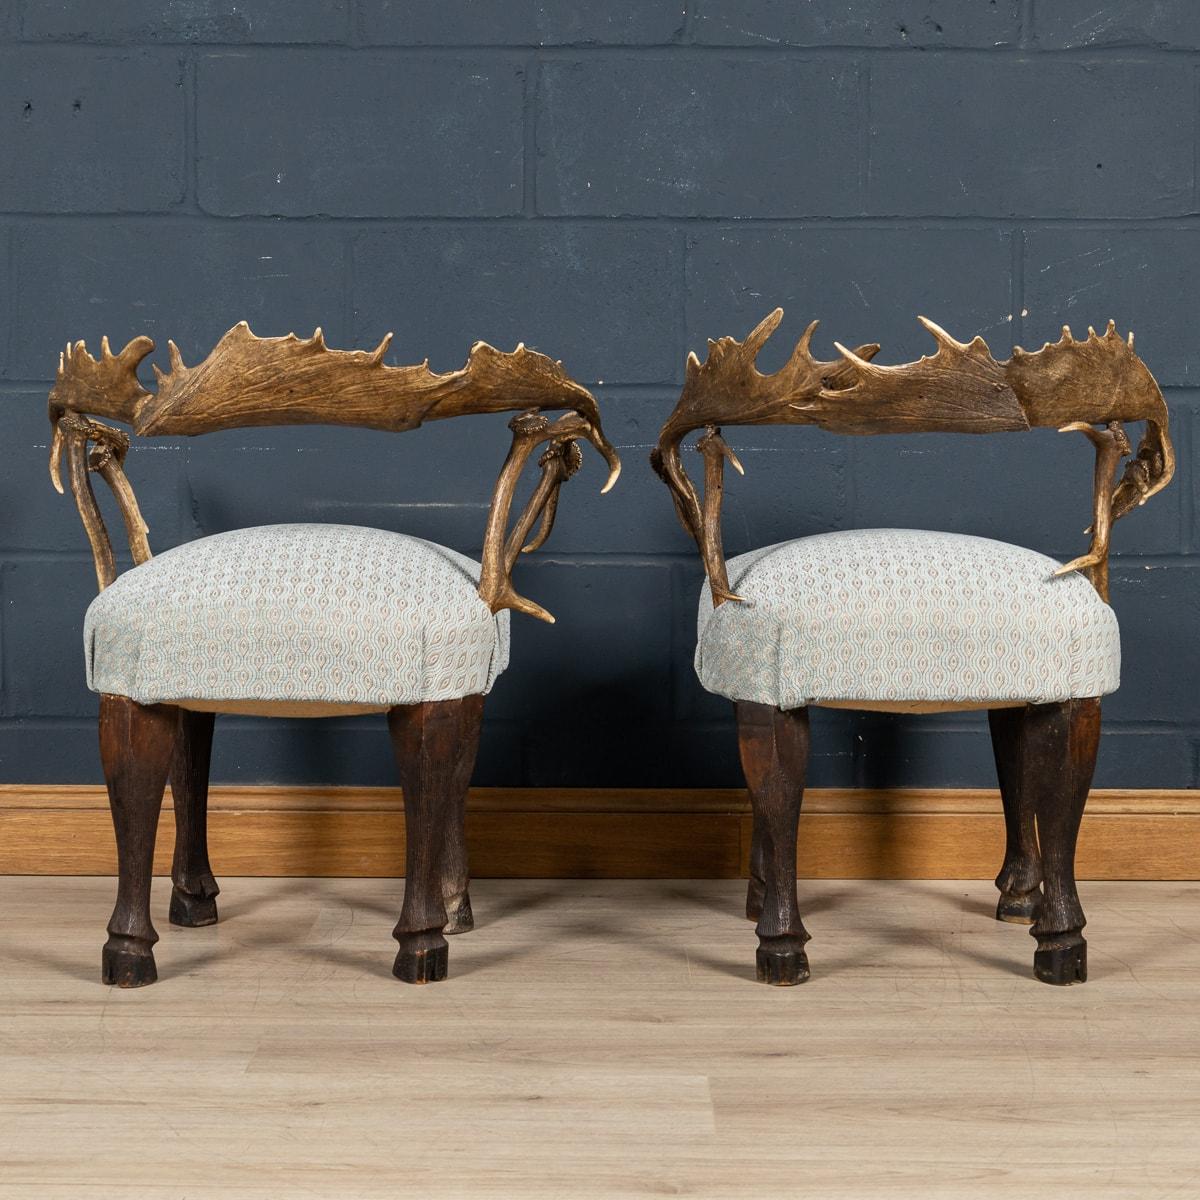 19th Century Pair Of Black Forest Antler Horn Hall Chairs, Swiss/German, c.1890 1